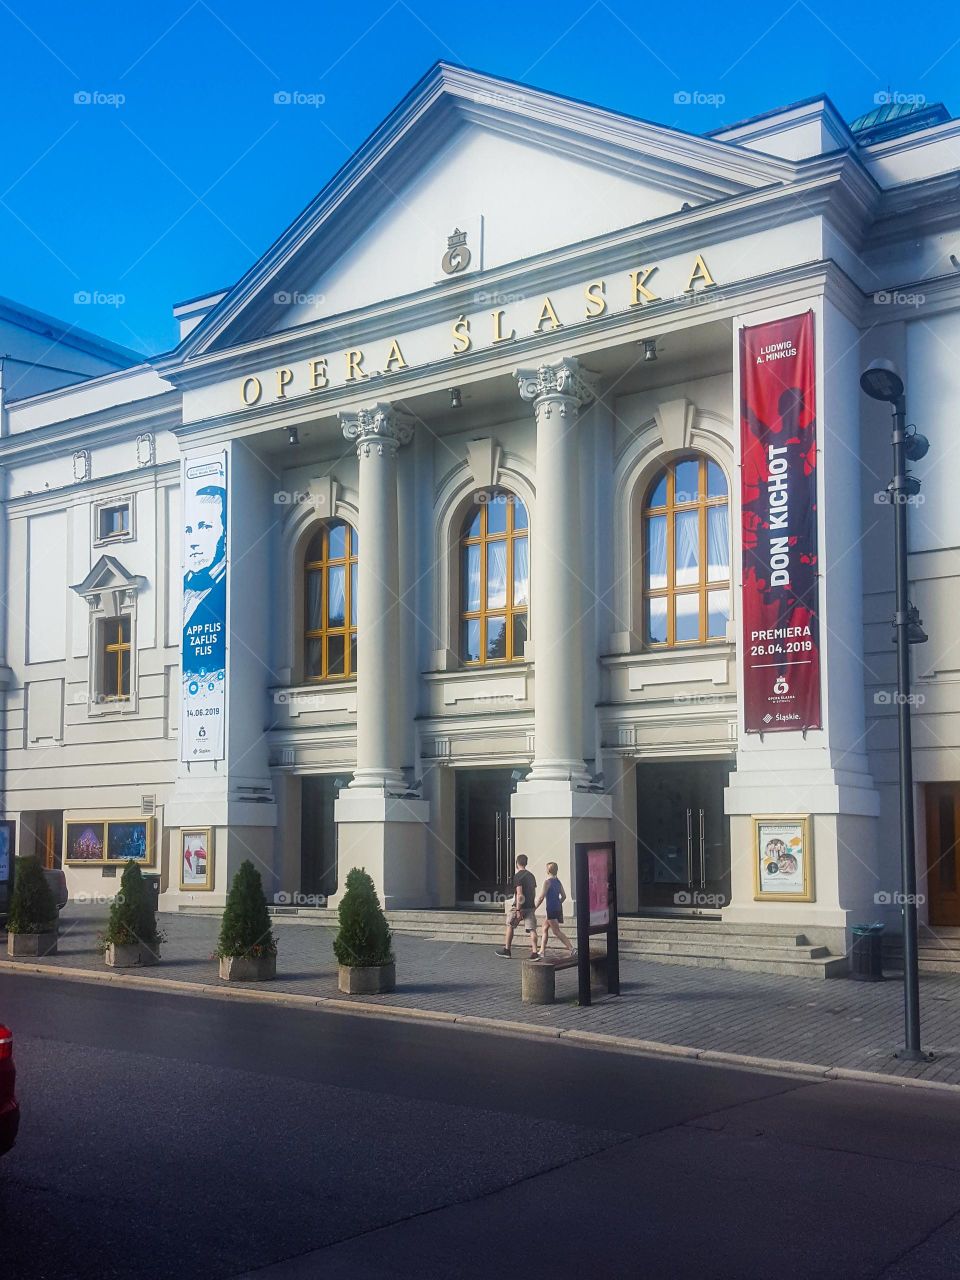 The building of Silesian Opera in Bytom.